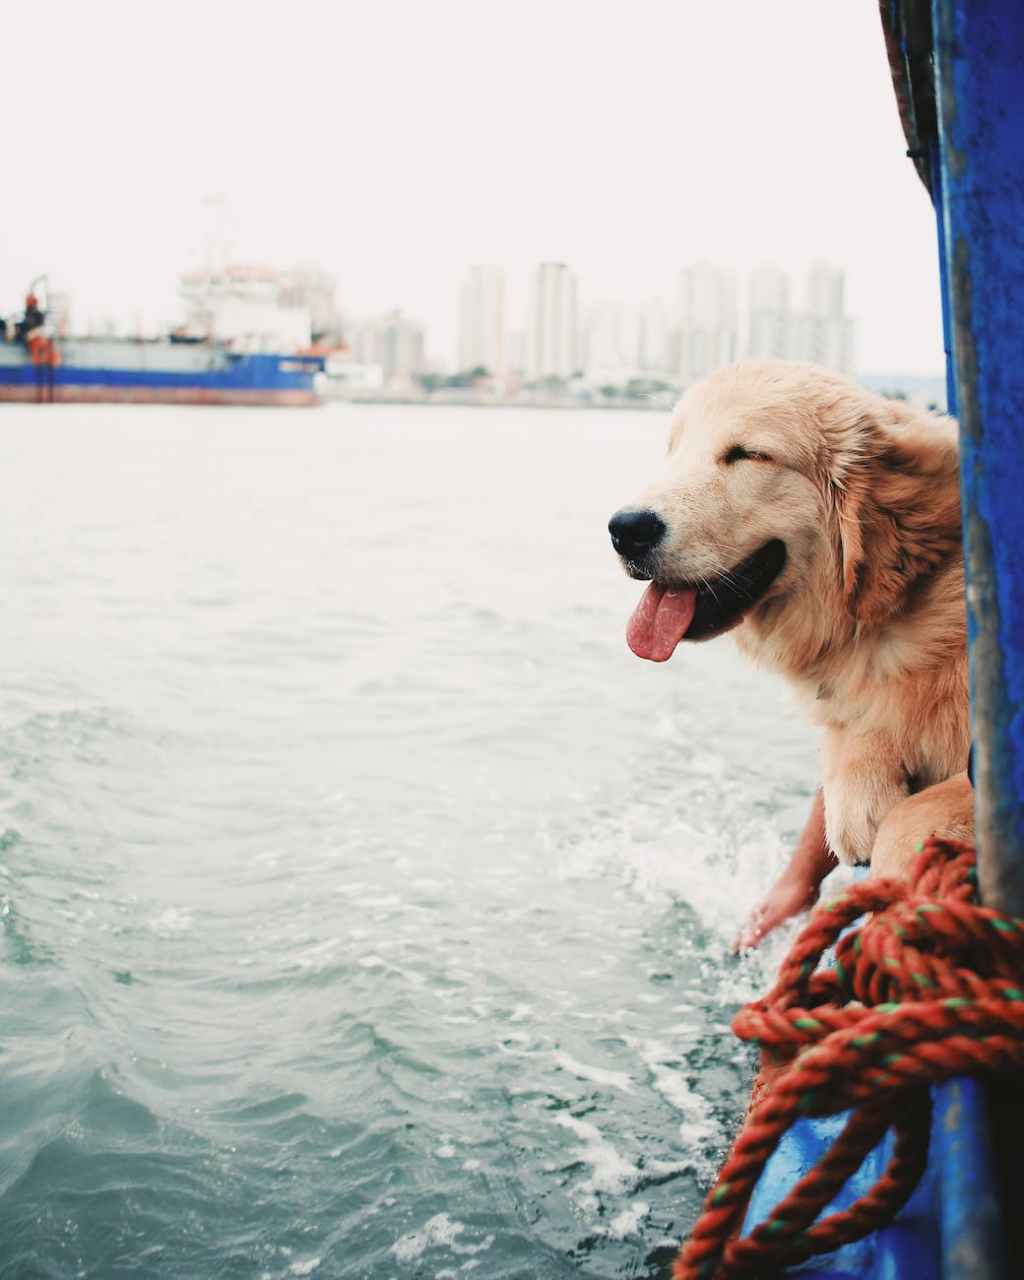 The Best and Funniest Boat Dog (and Dog Boat) Names (That We Could Think Of)